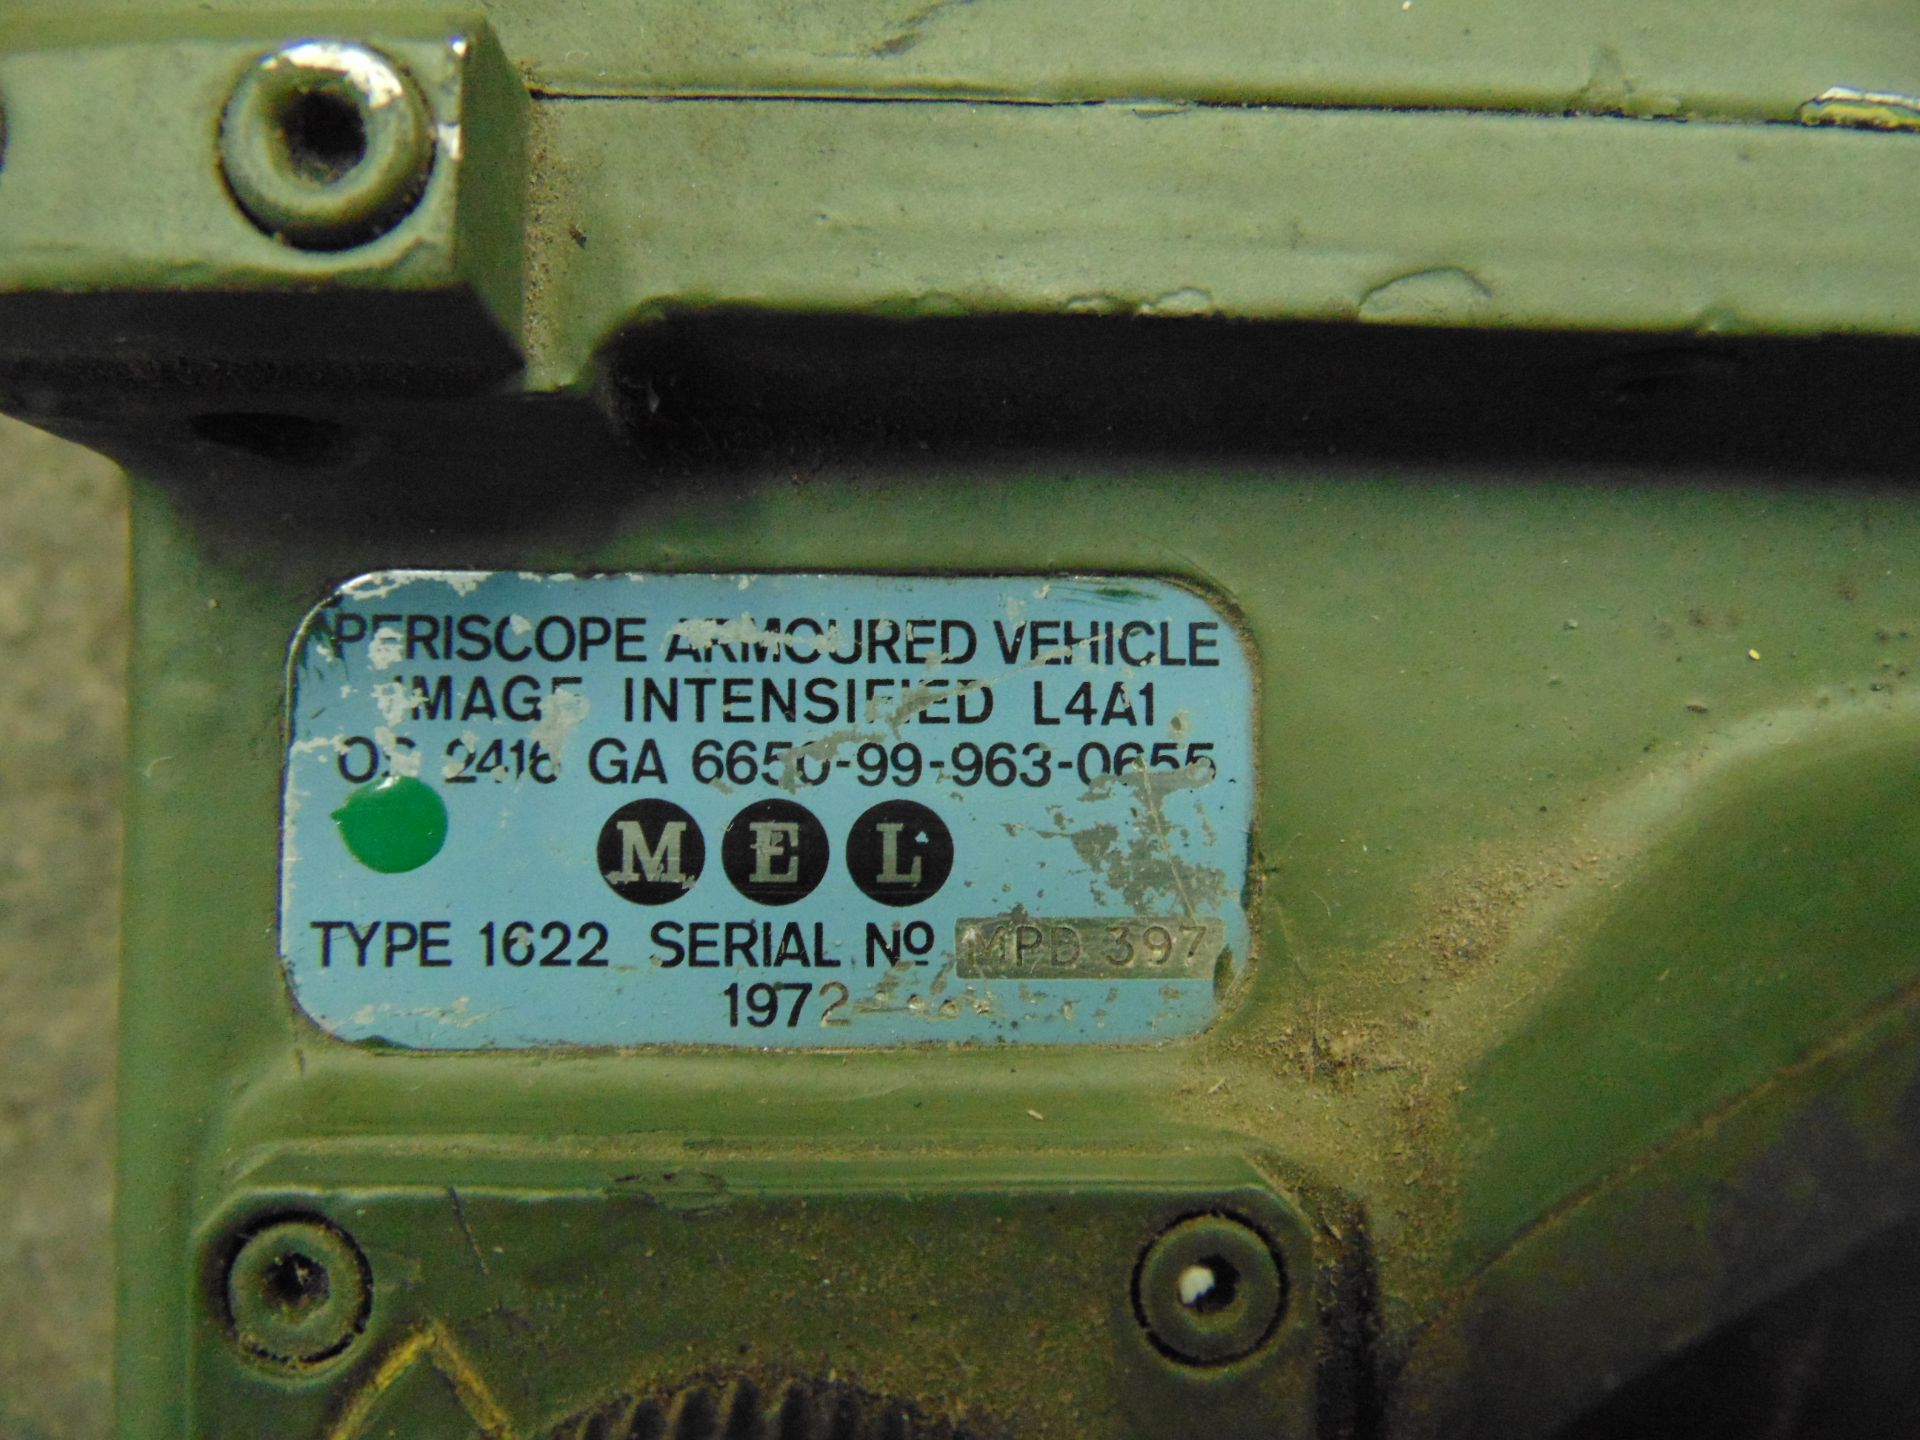 Type 1622 L4A1 Image Intensified Periscope - Image 4 of 8